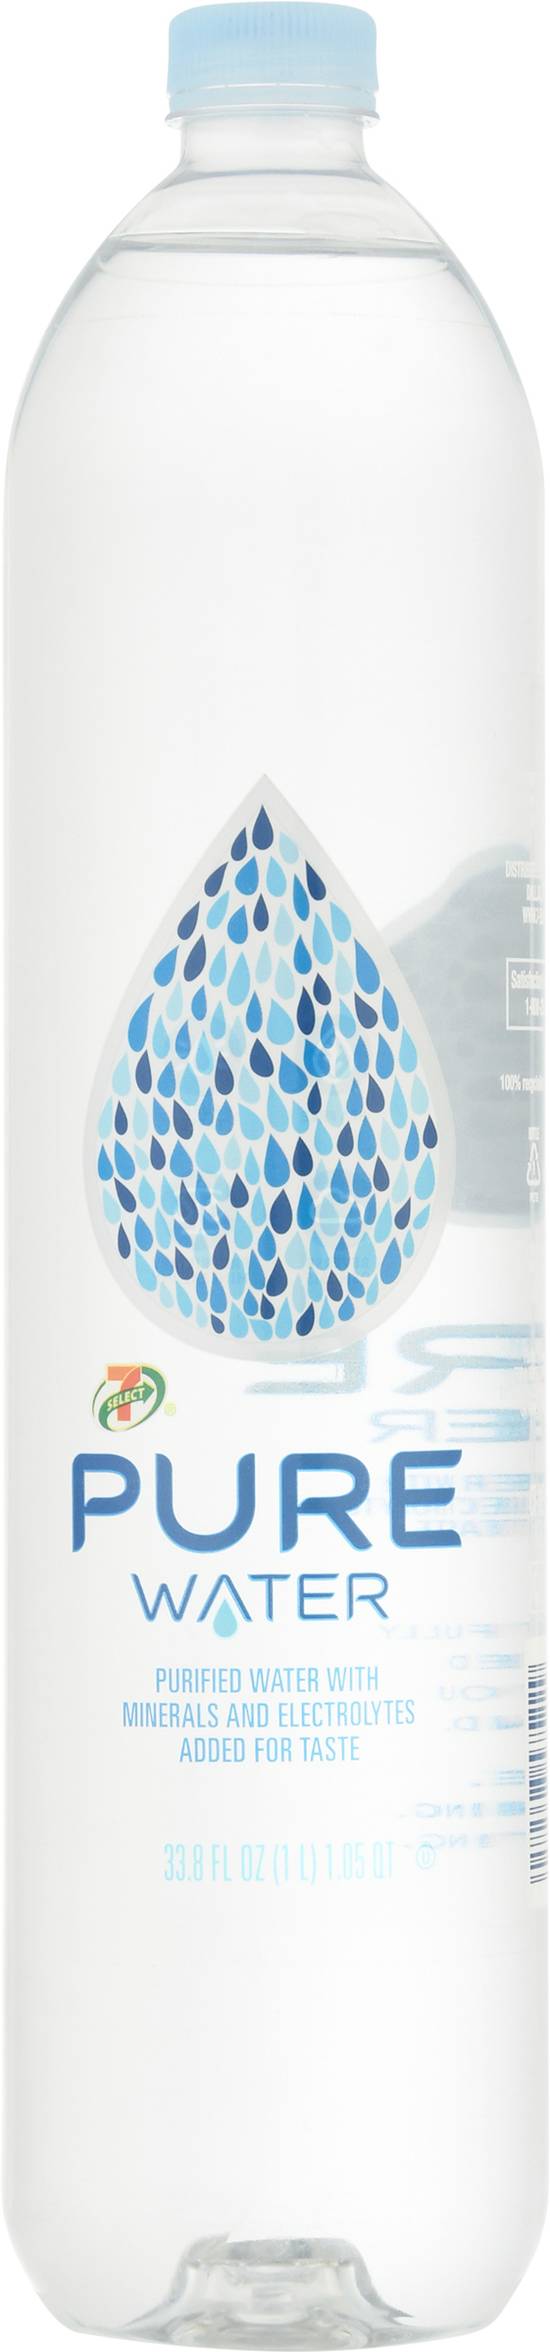 7-Select Minerals and Electrolytes Purified Pure Water (33.8 fl oz)